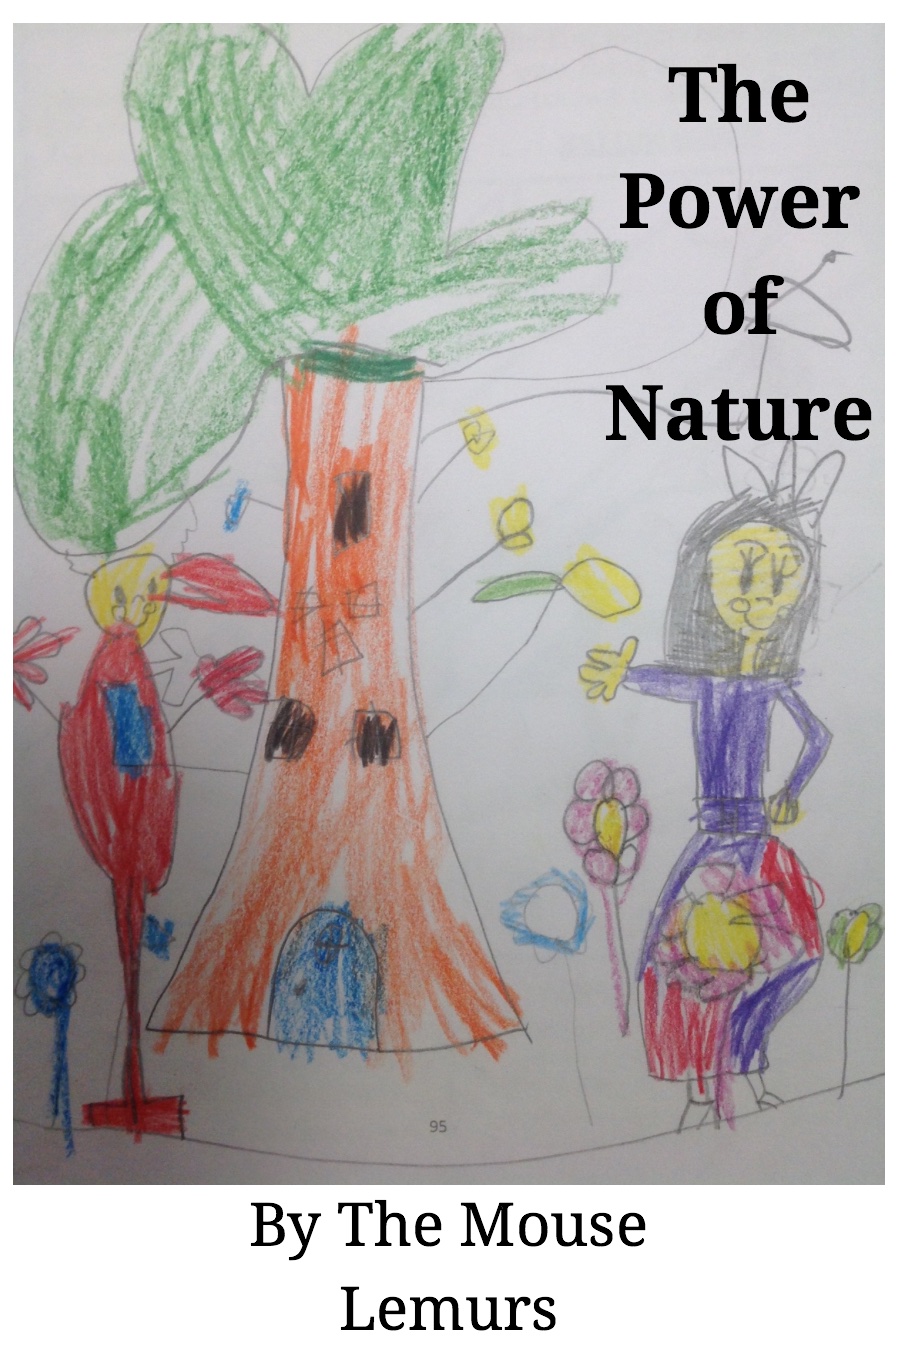 The Power of Nature by Herndon – June 20 – 1st Grade